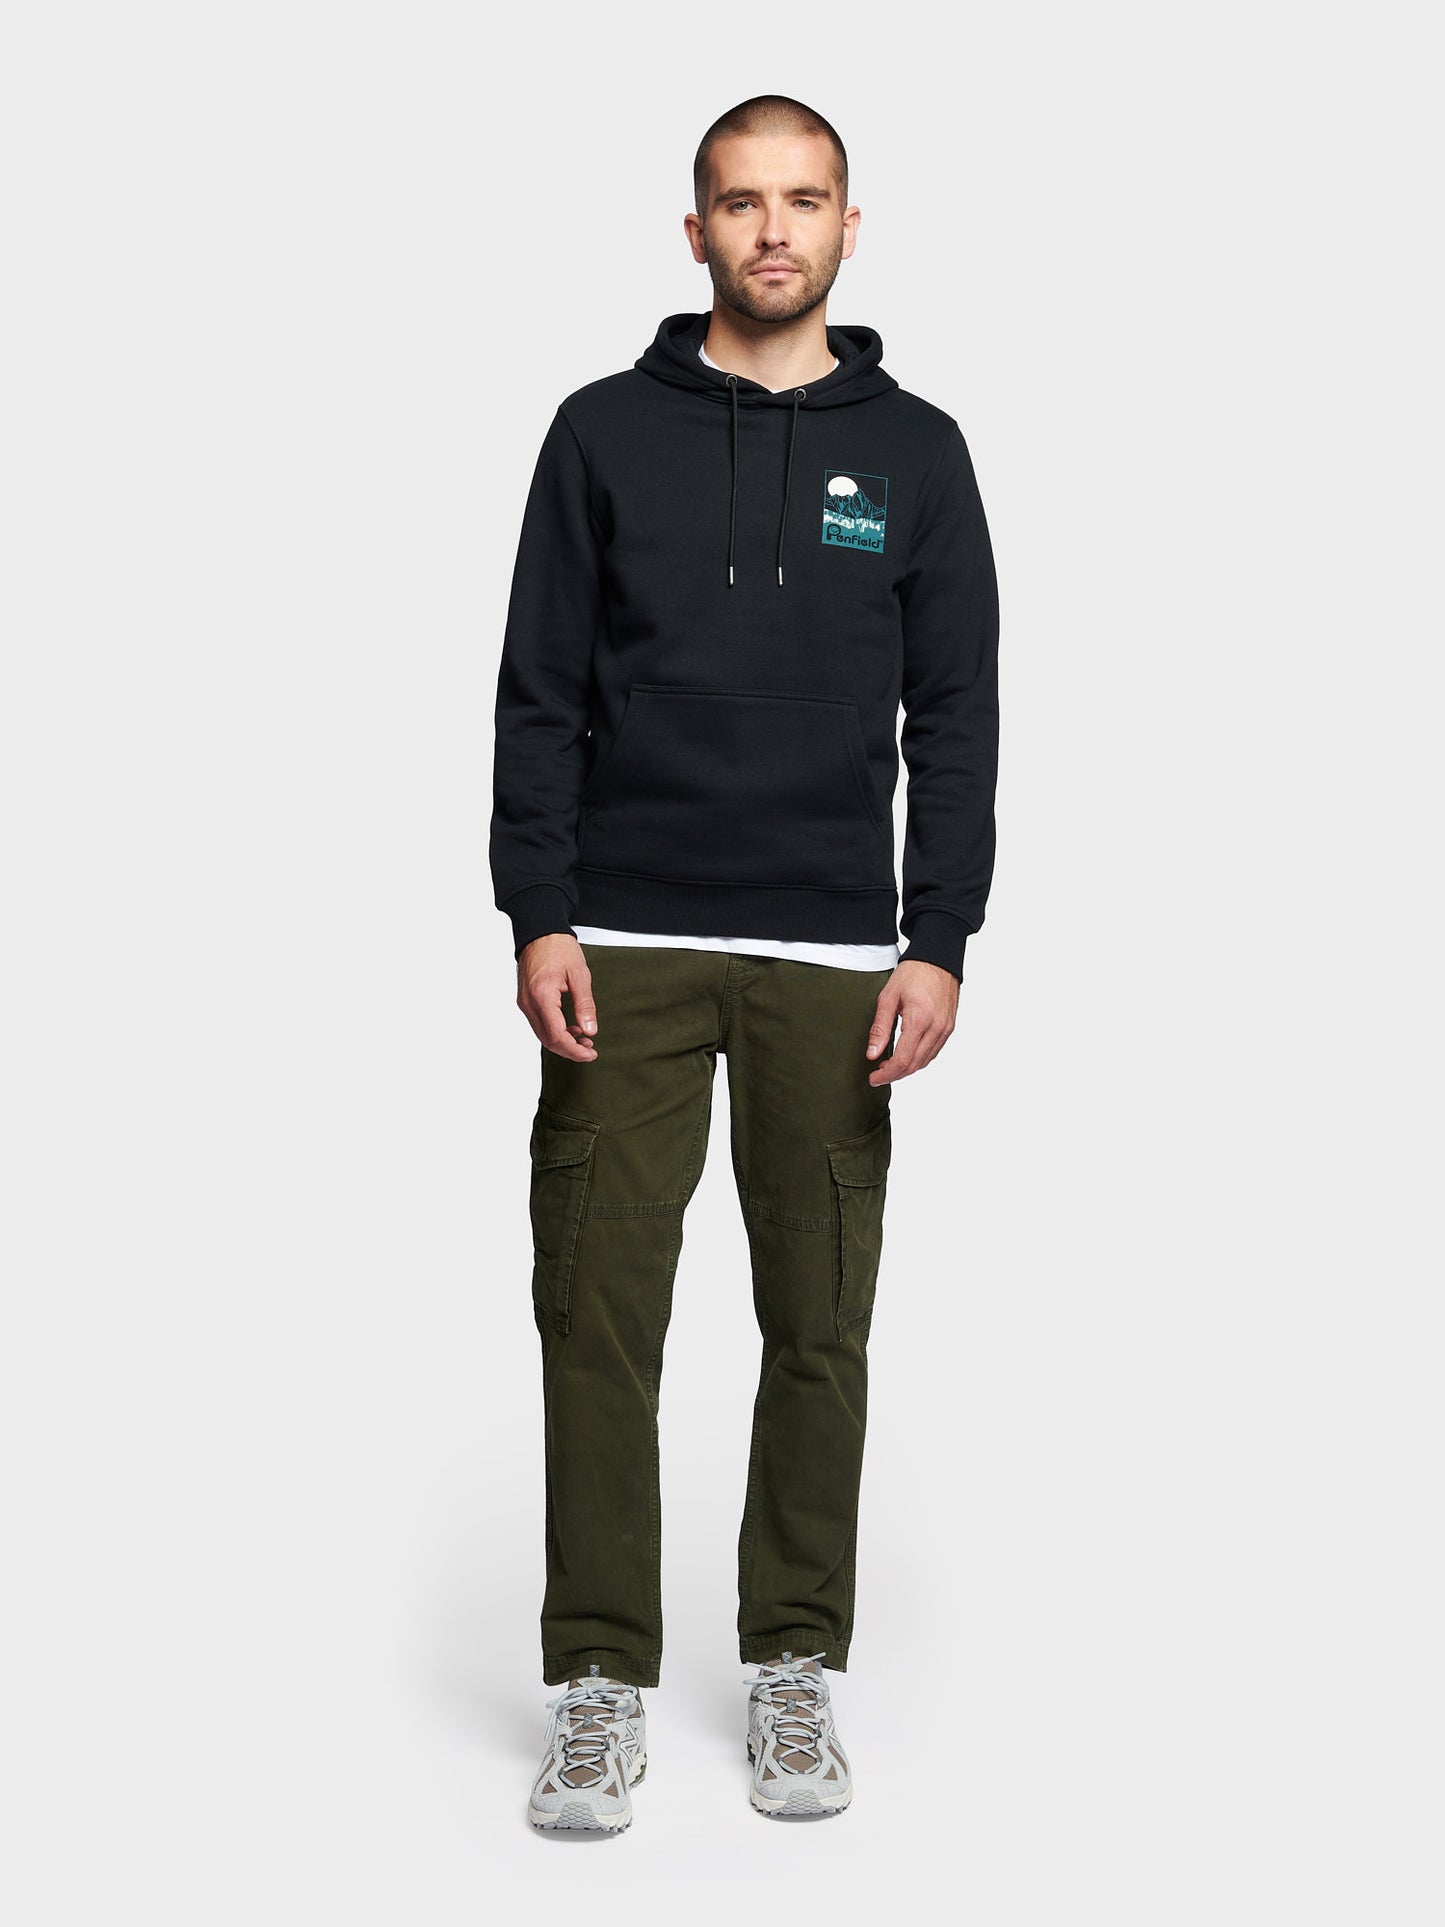 Washed Mountain Graphic Hoodie in Black